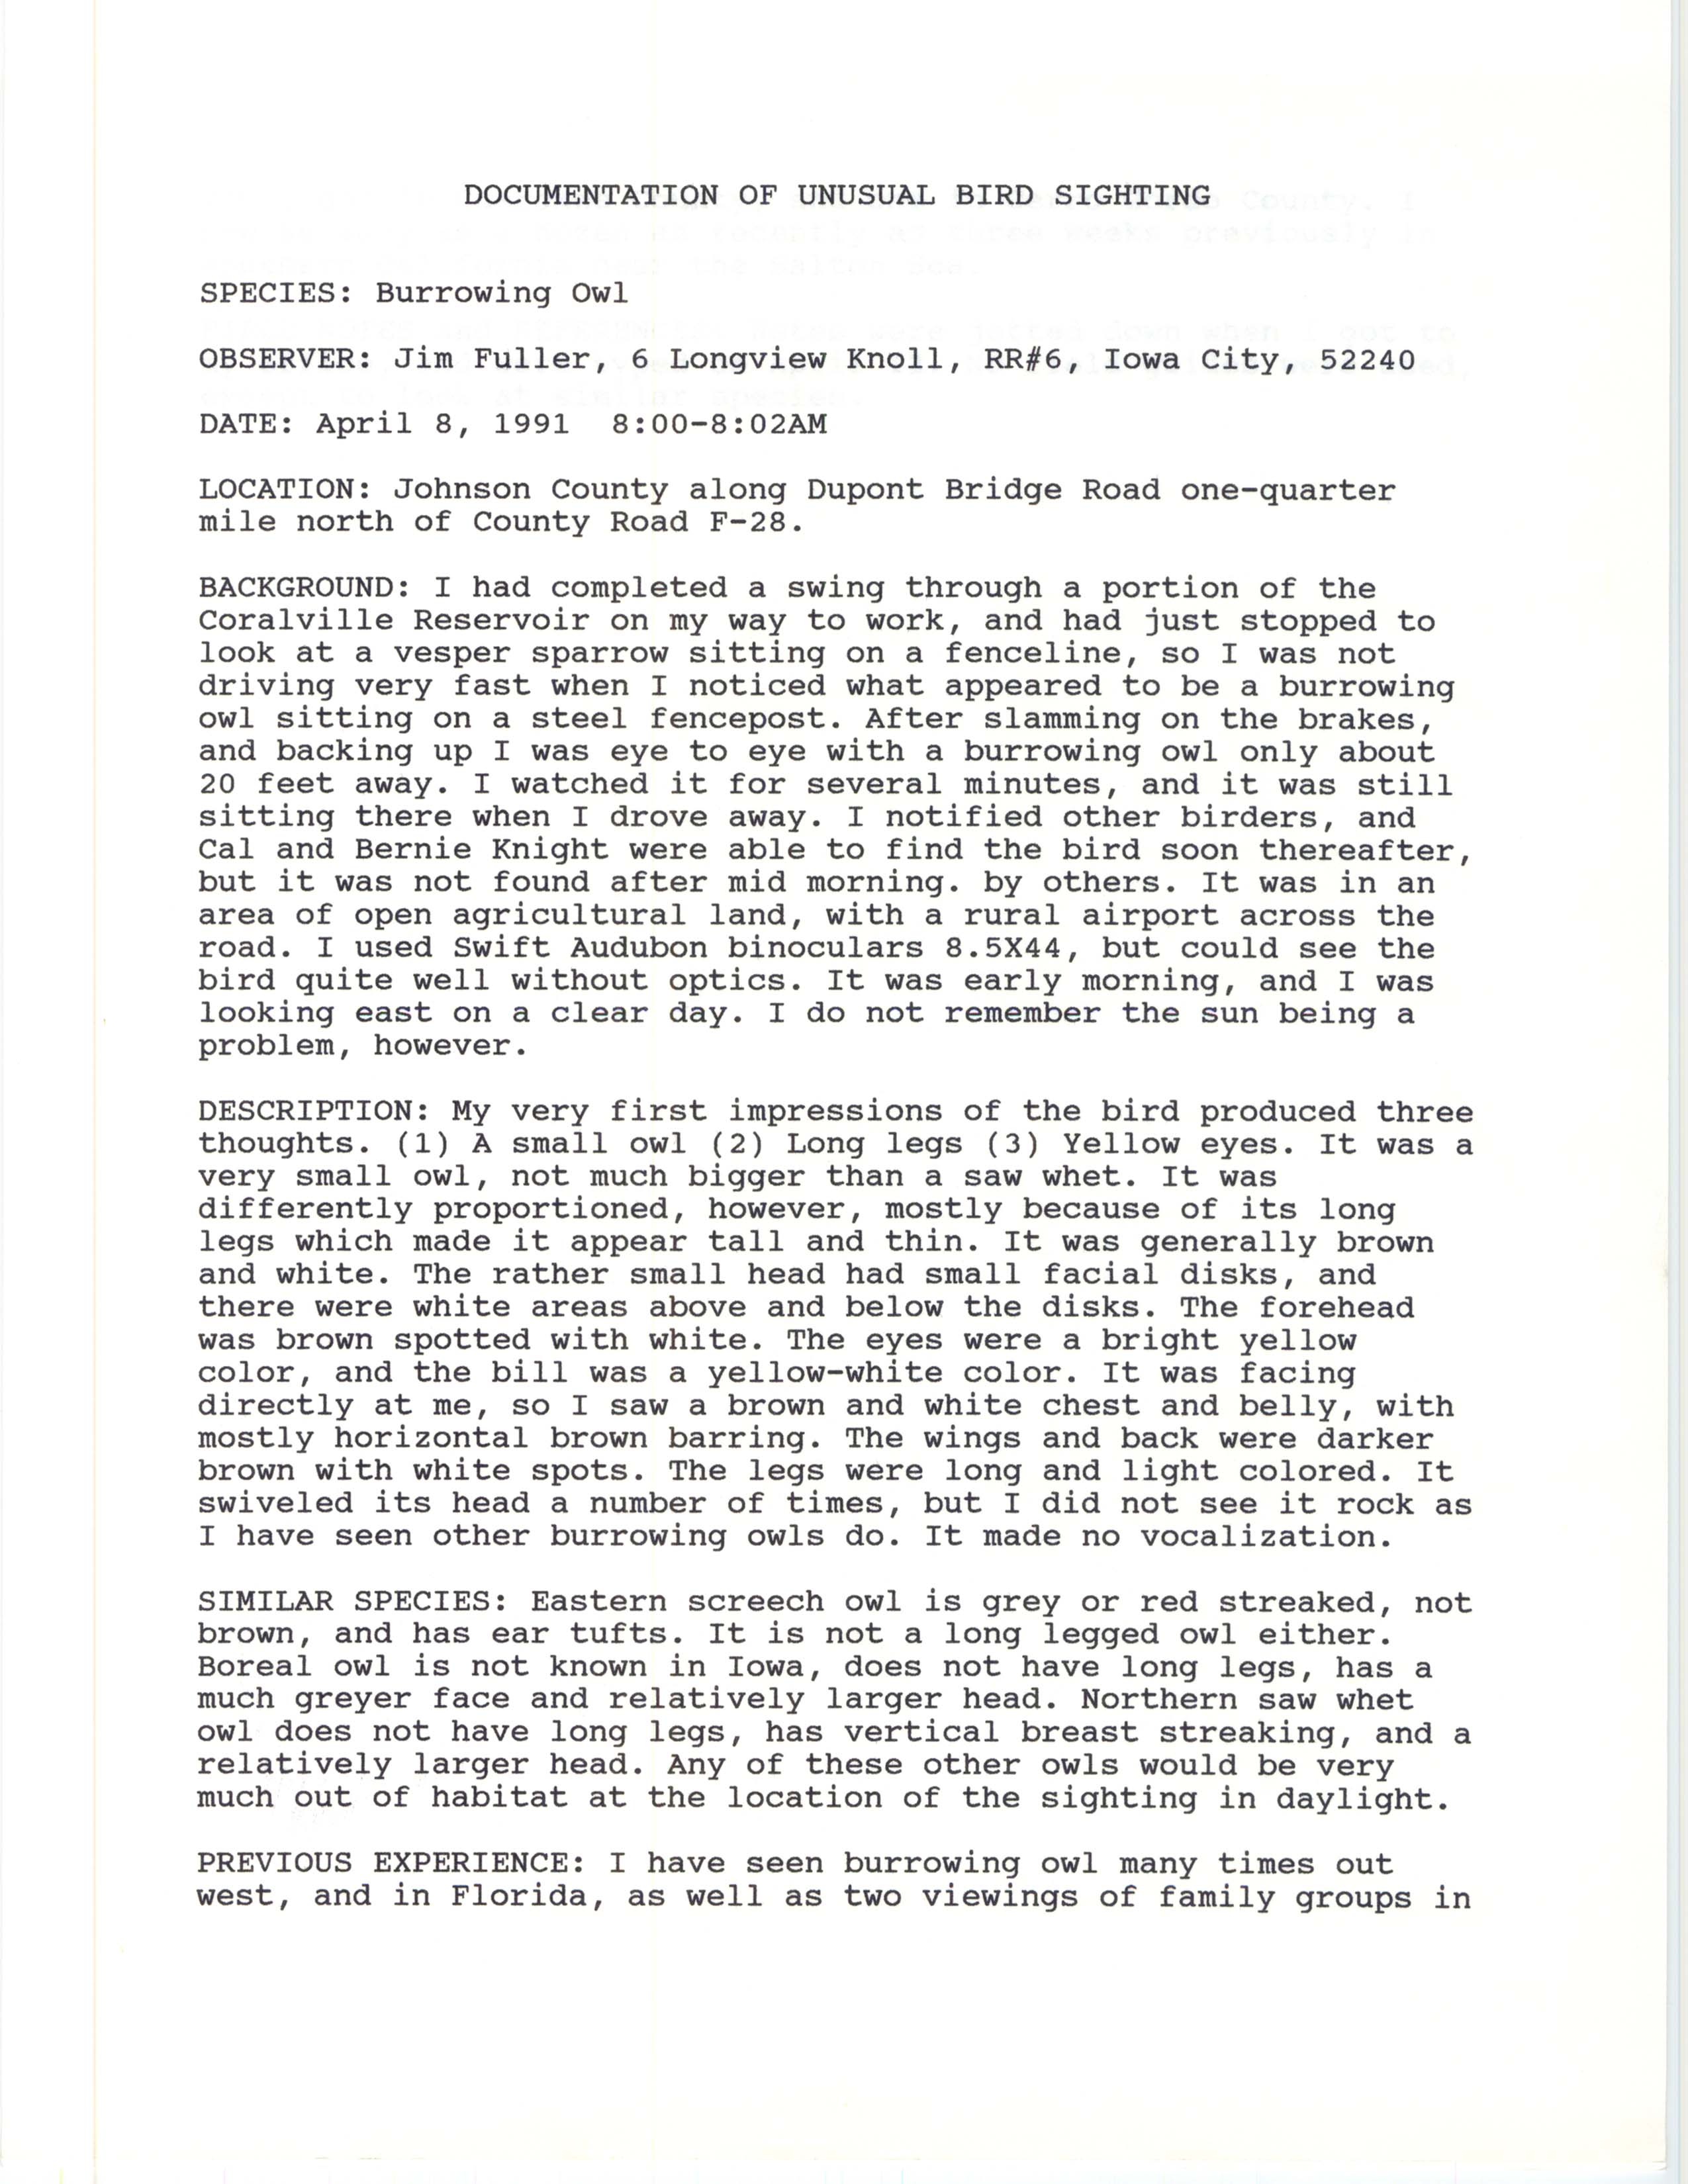 Rare bird documentation form for Burrowing Owl at Coralville Reservoir, 1991